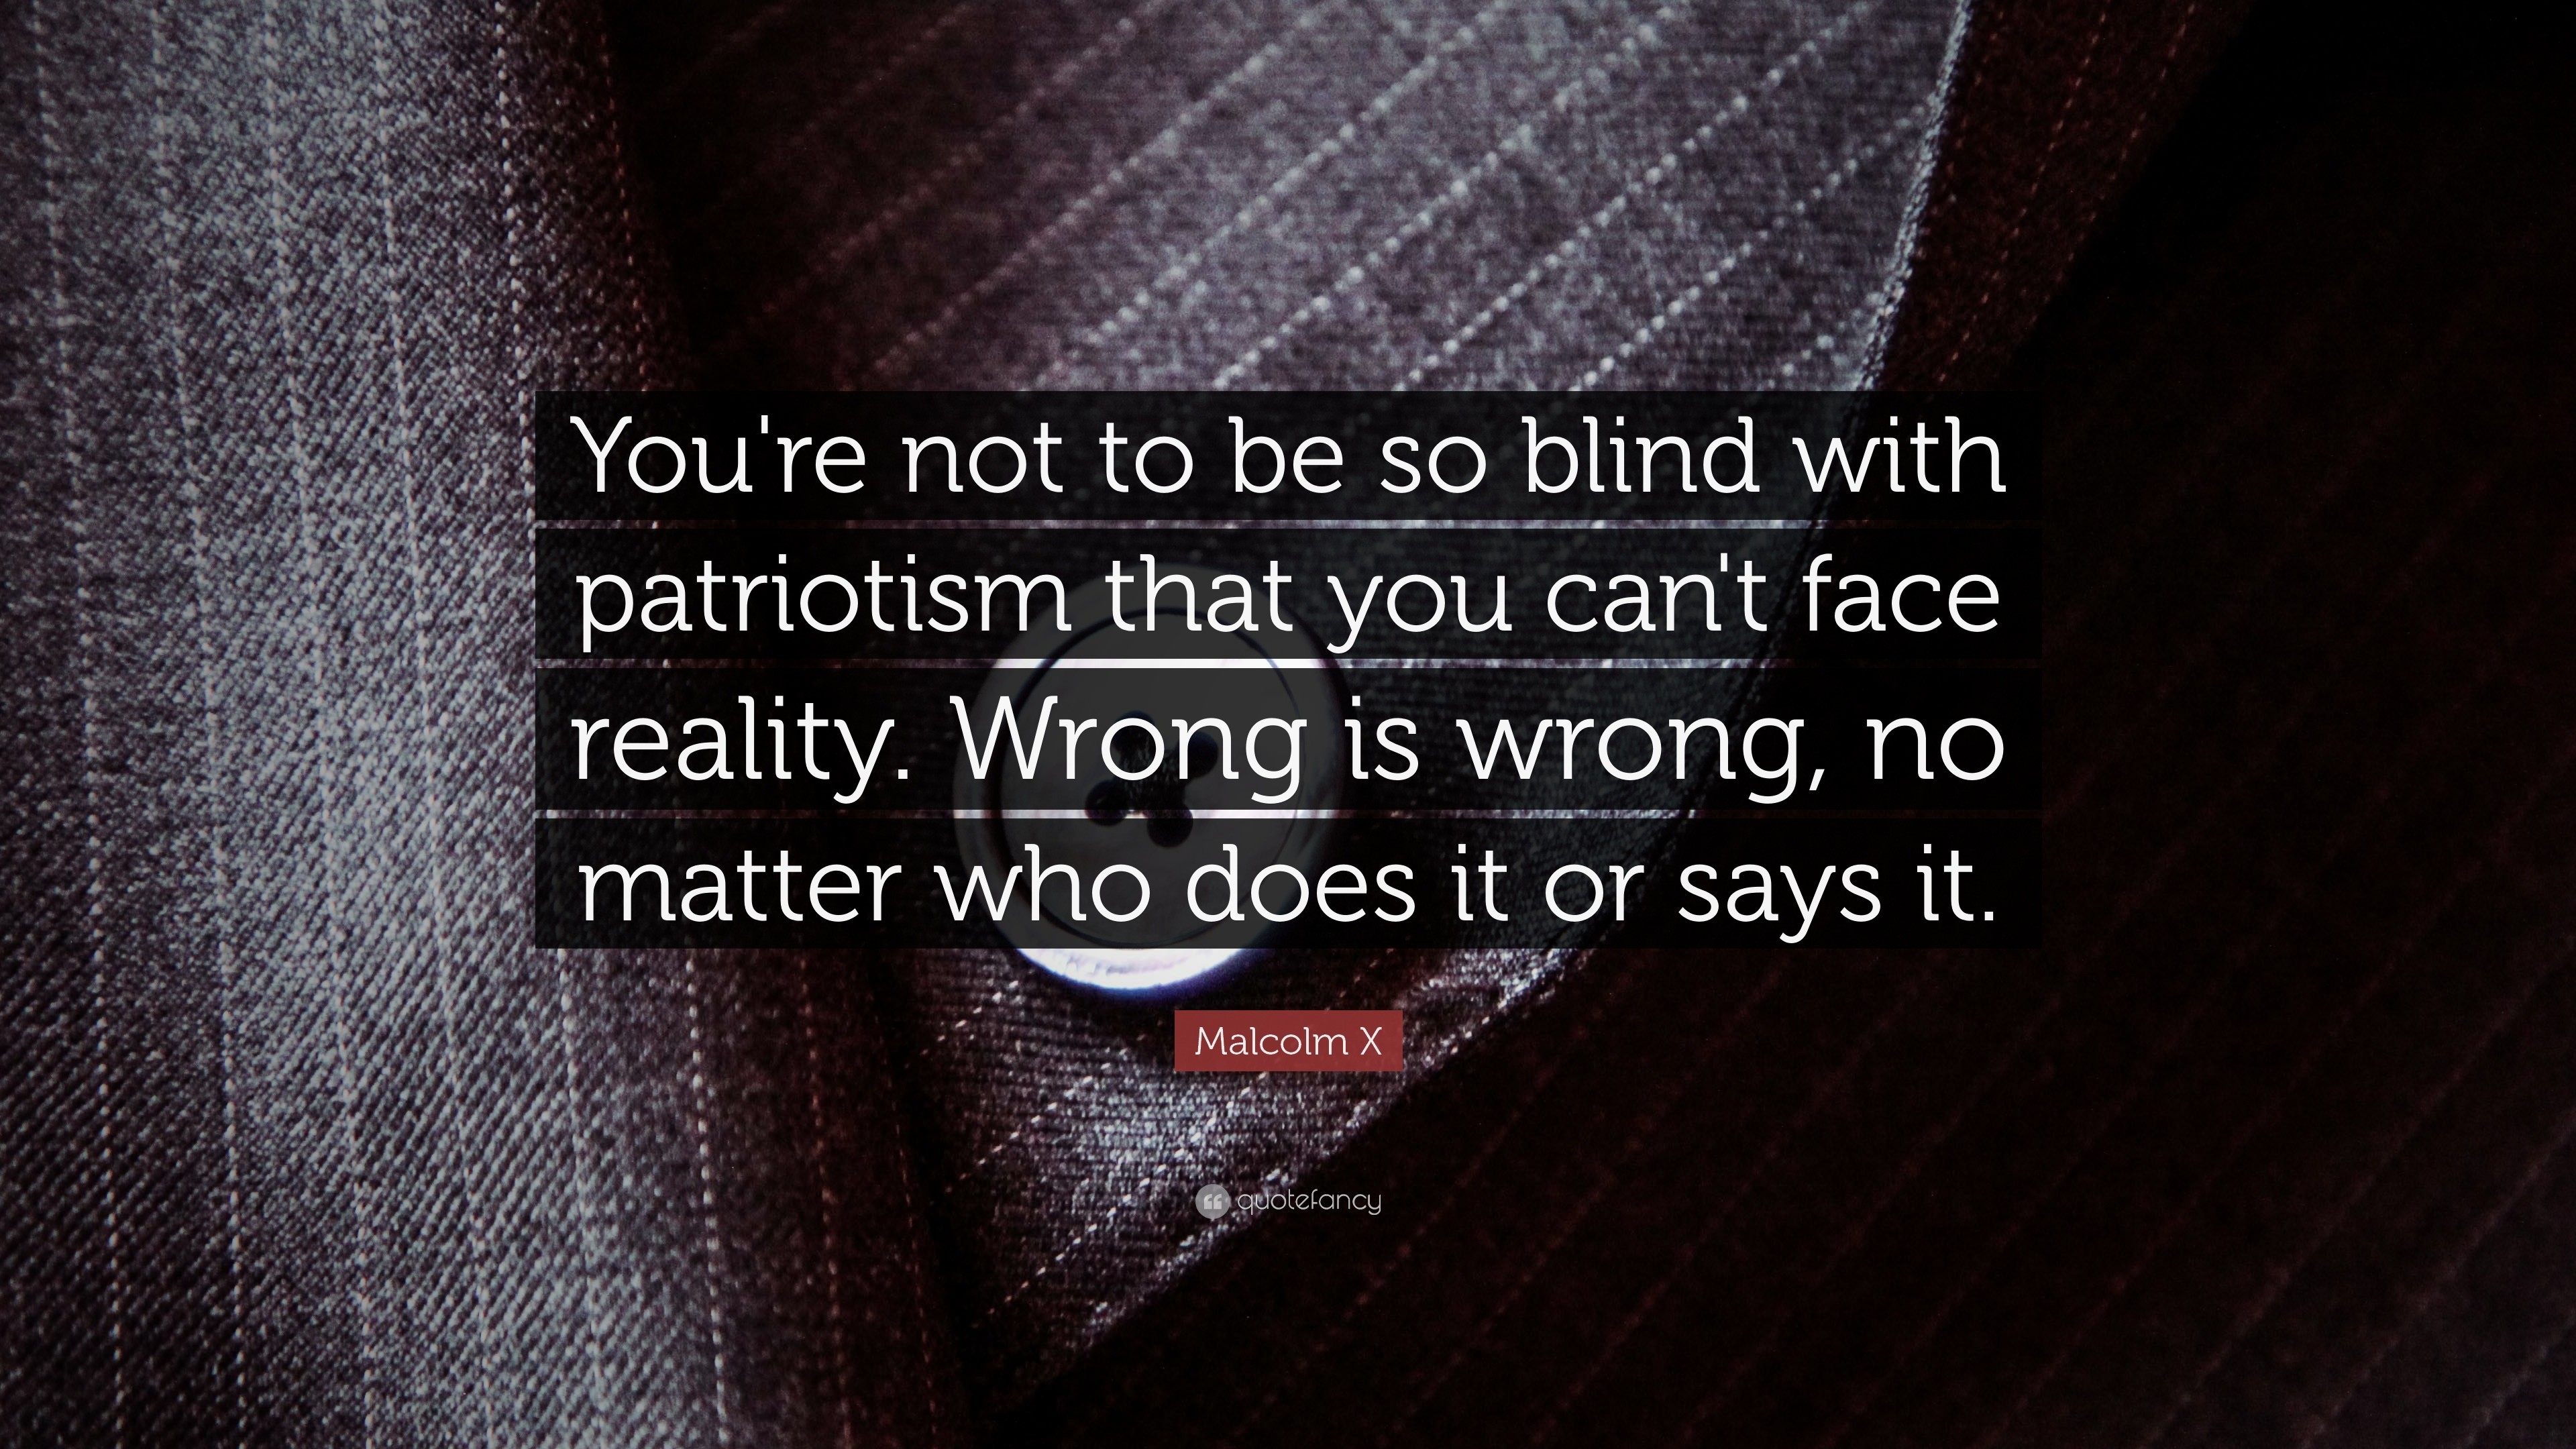 3840x2160 Malcolm X Quote: “You're not to be so blind with patriotism that